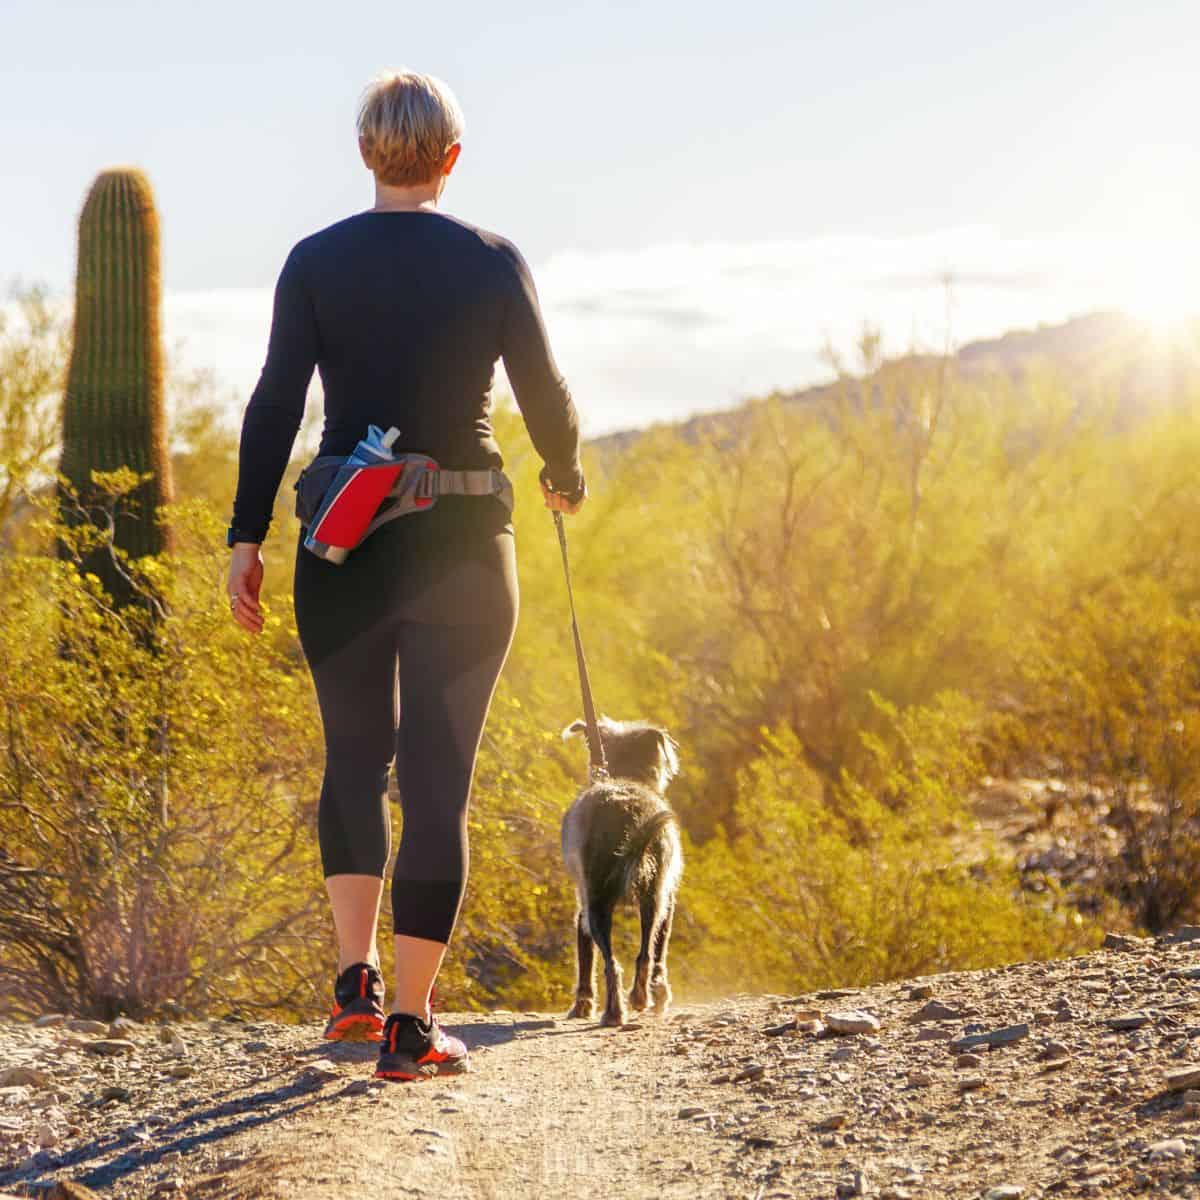 Lady walking away near cactus with a small grey dog on her leash.